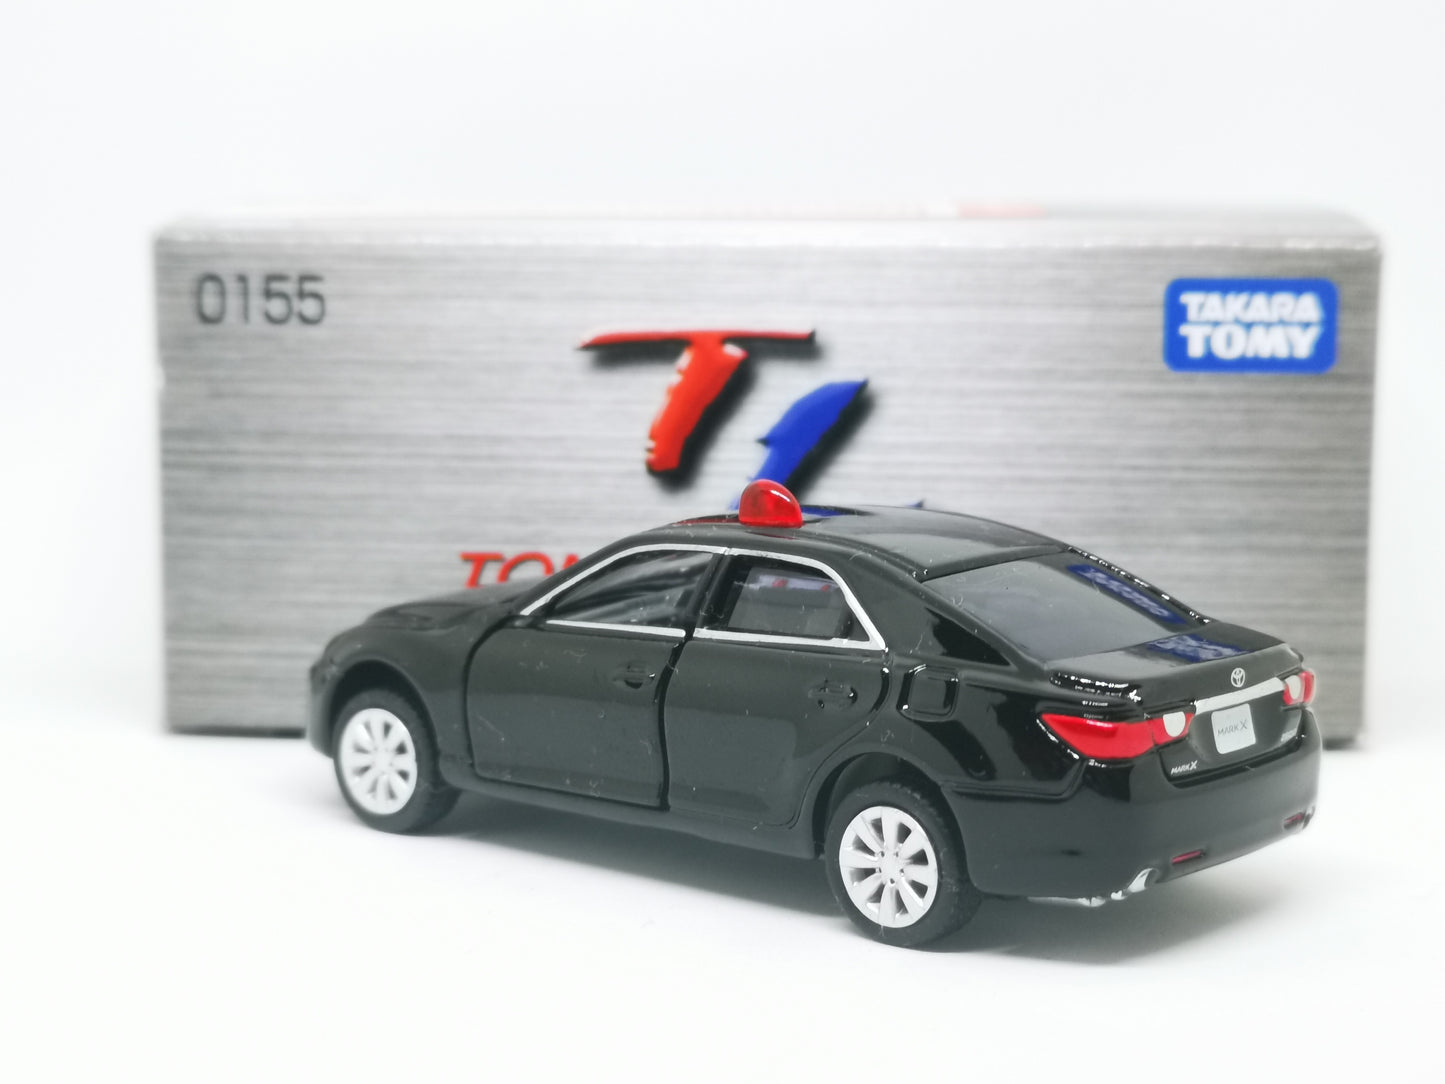 Tomica Limited No.155 Toyota Mark X unmarked Police Car